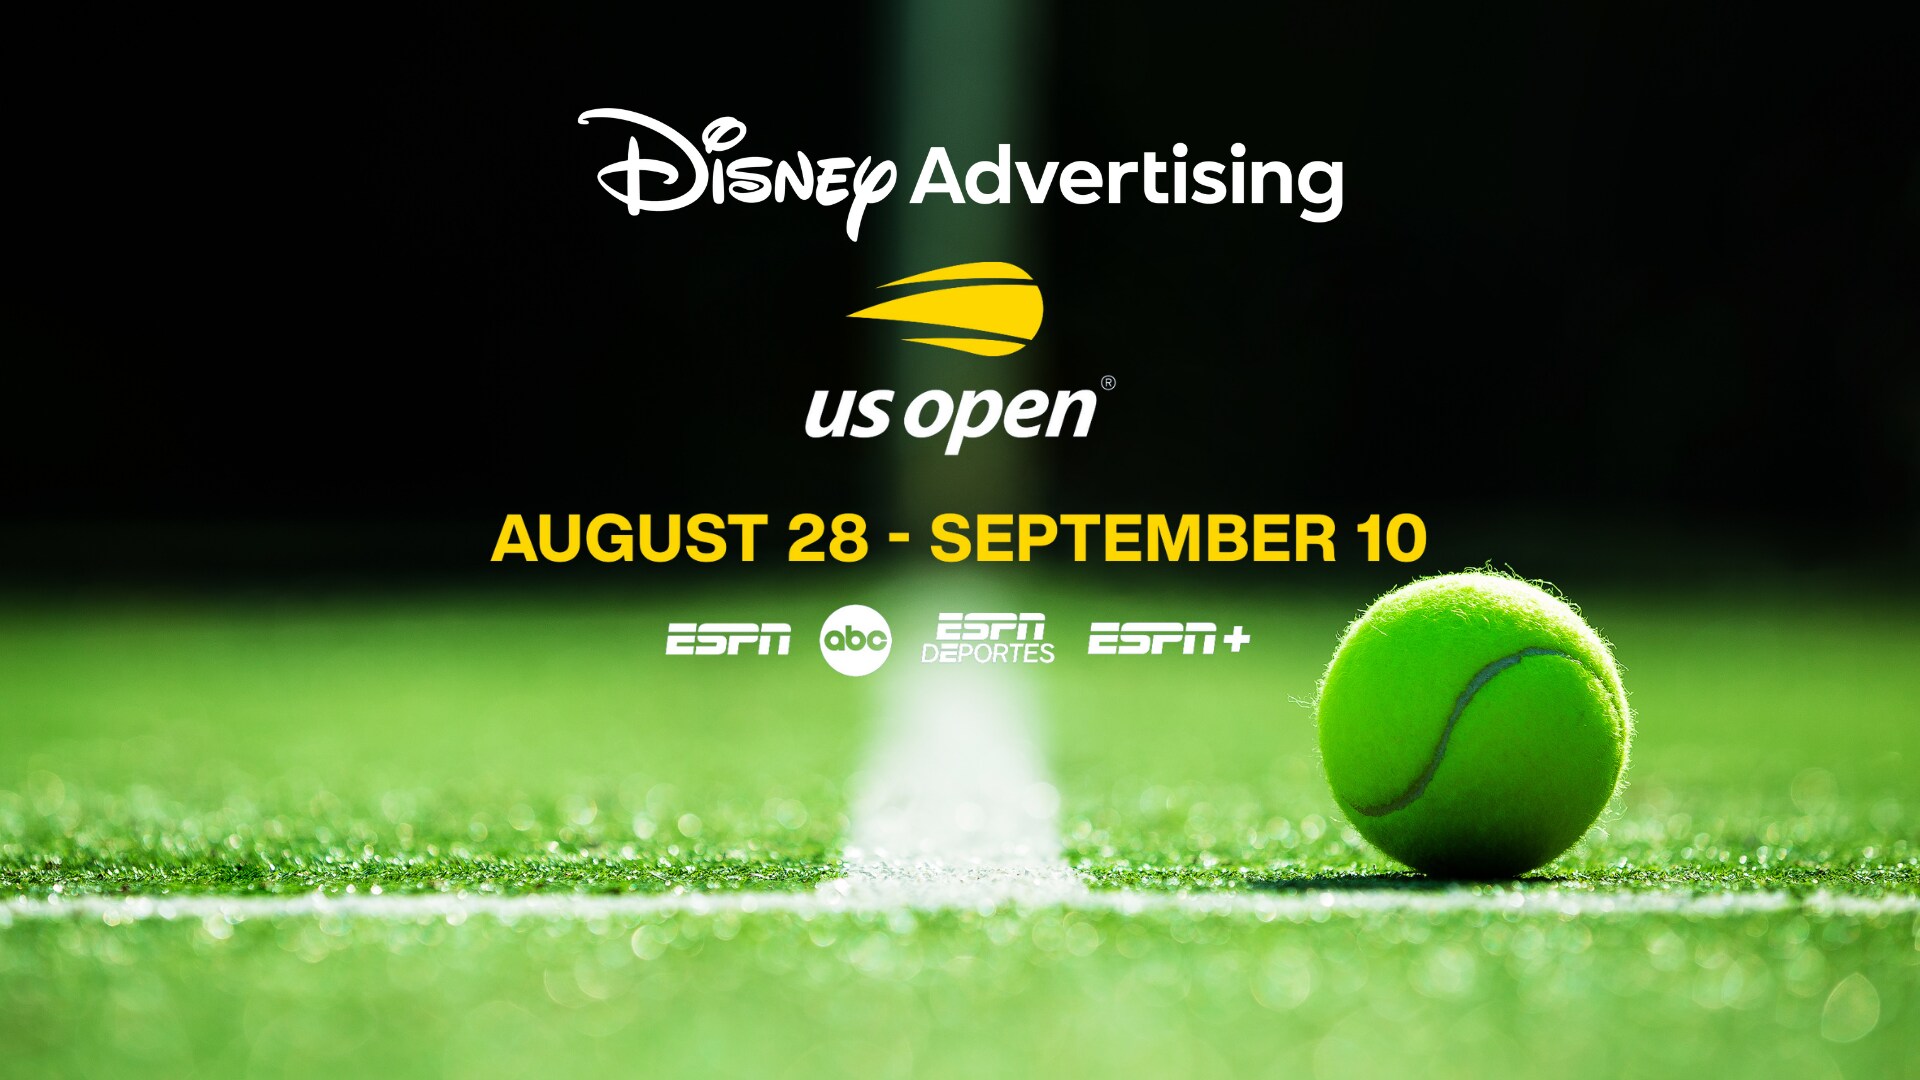 Disney Advertising Serves Up a Sold-Out 2023 US Open Disney Advertising Press